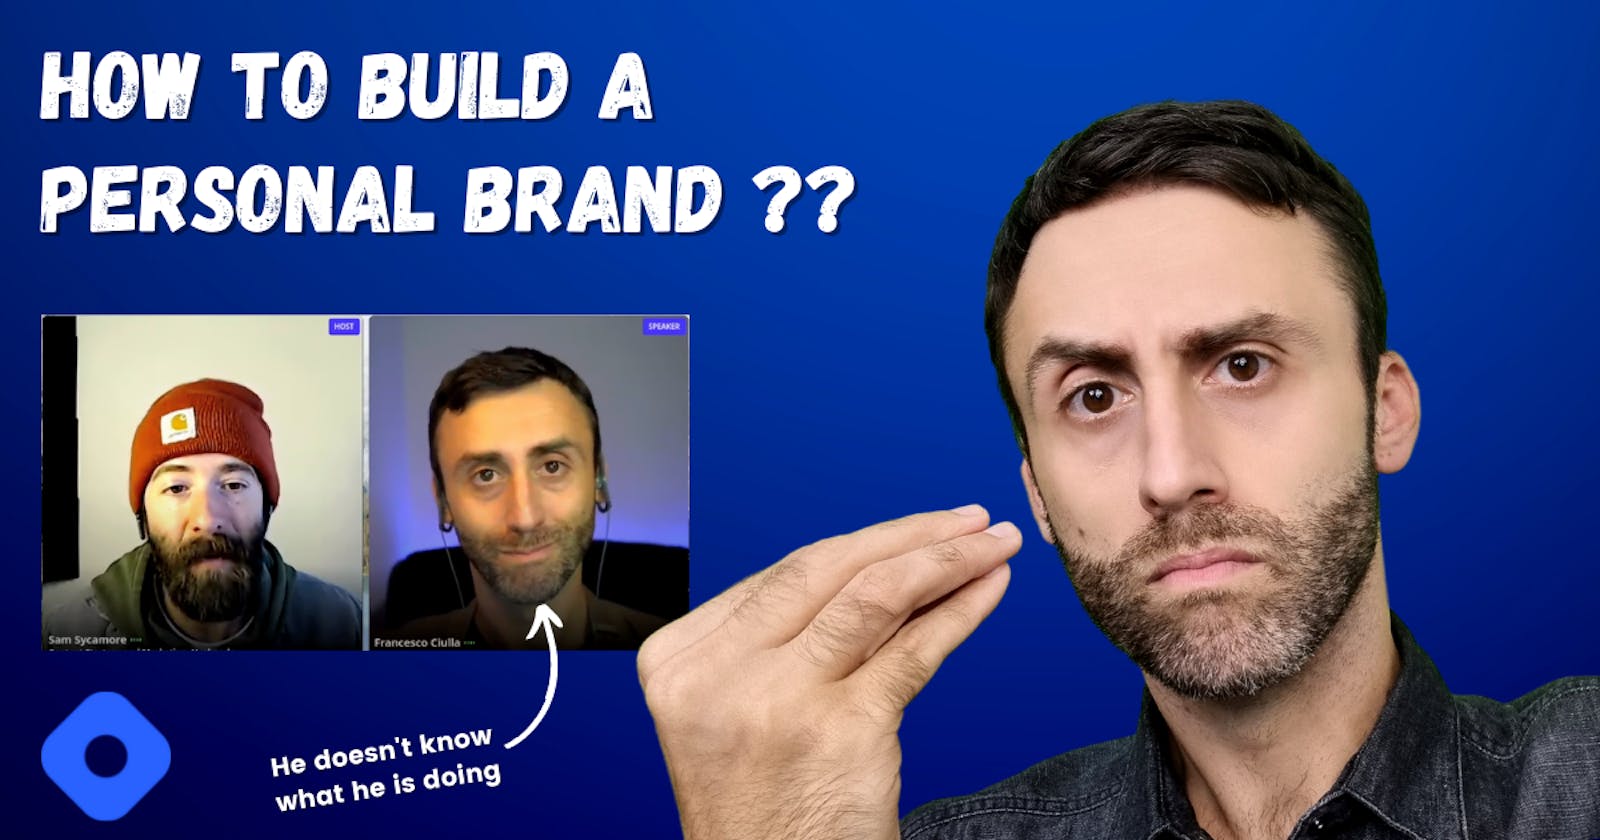 How to build a personal brand effectively